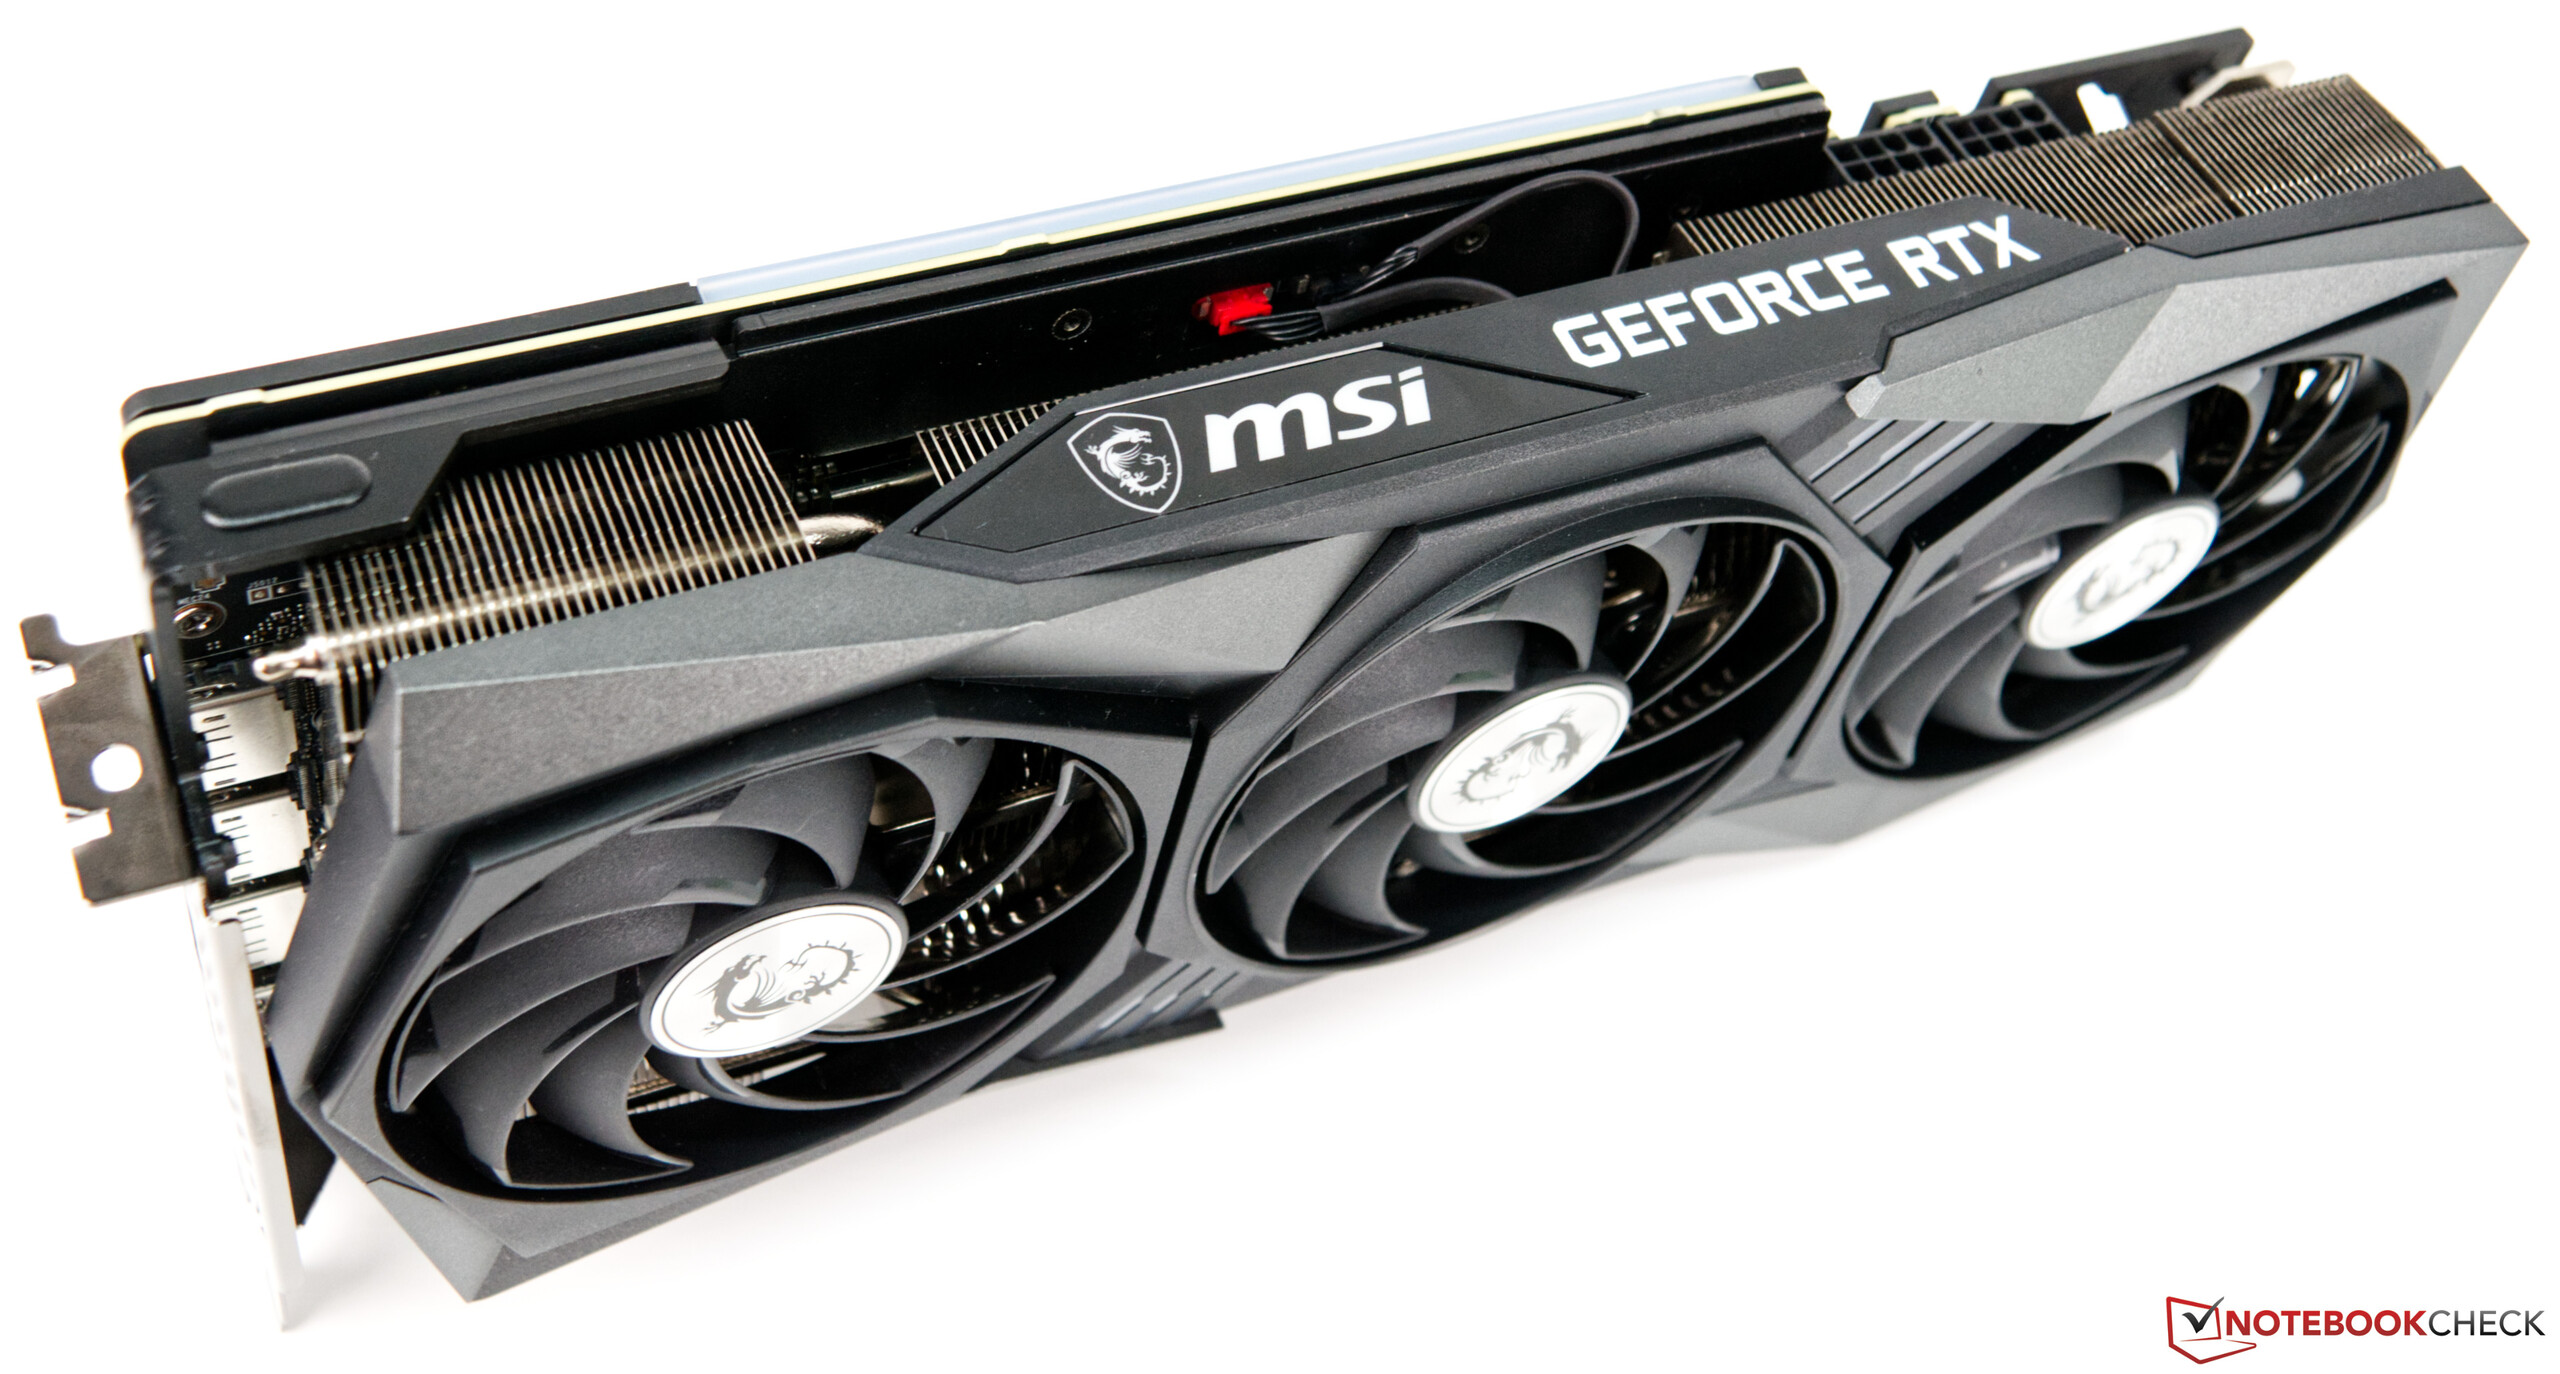 MSI GeForce RTX 3070 Gaming X Trio desktop graphics card in review